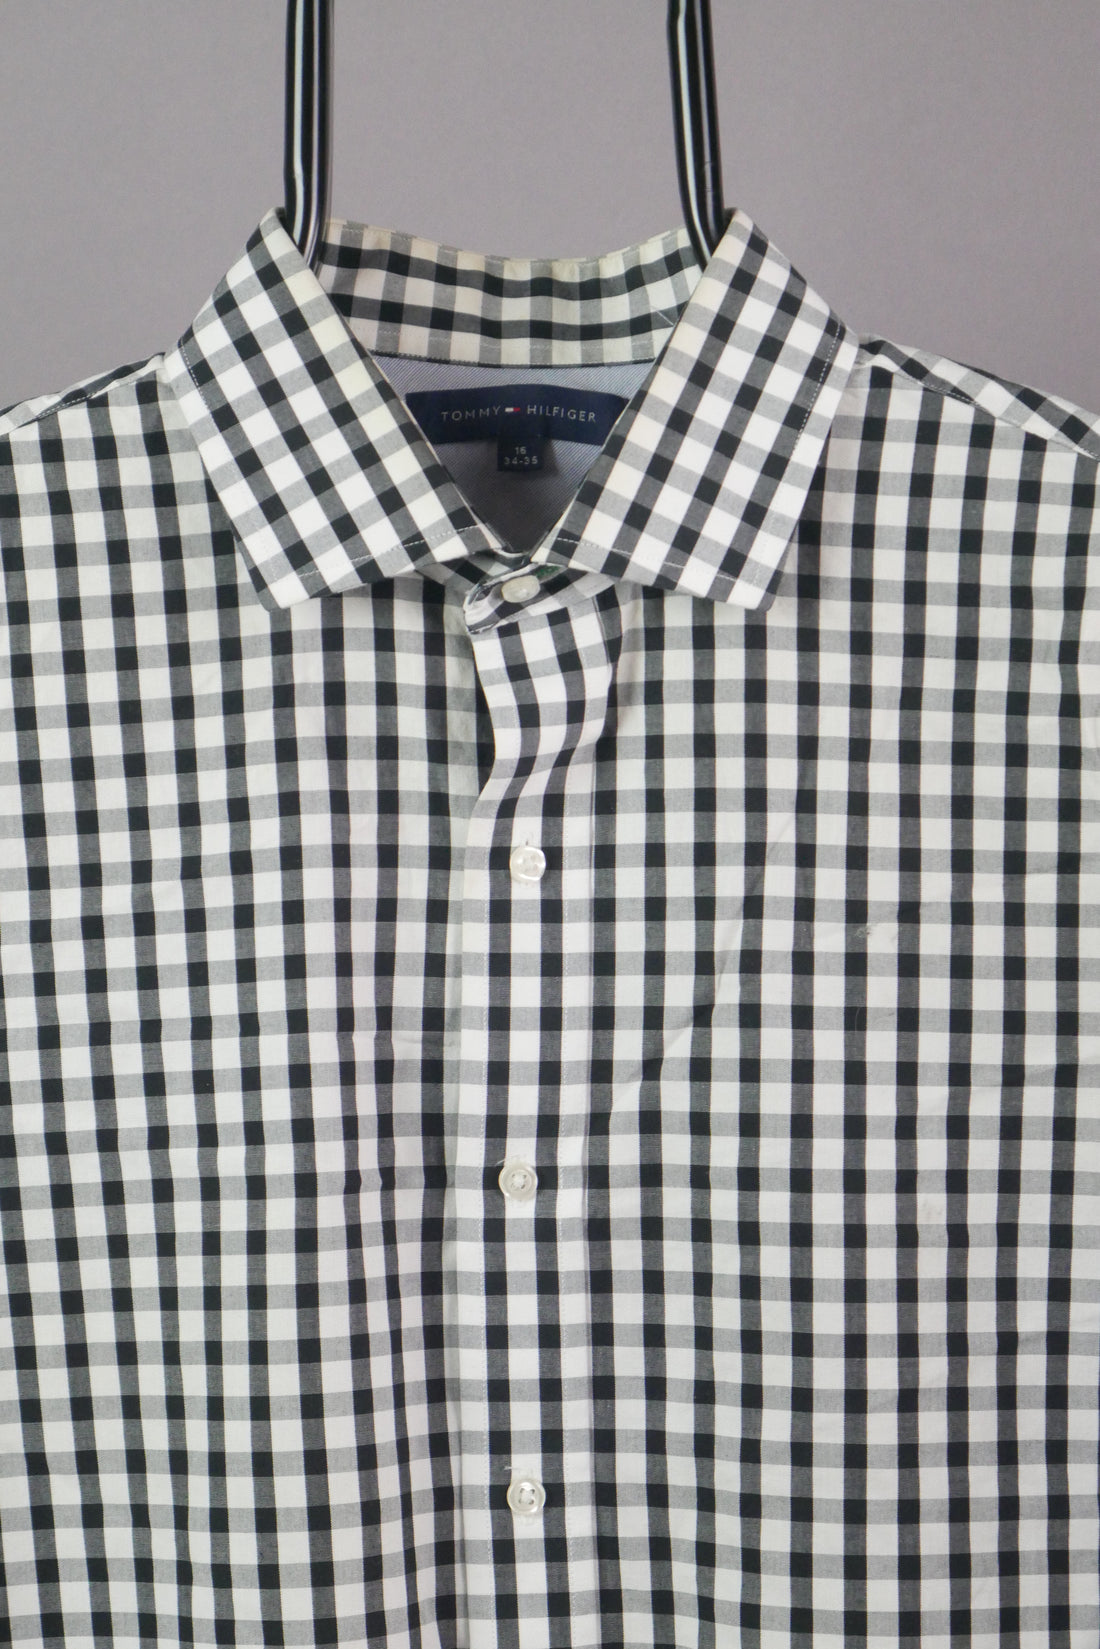 The Tommy Hilfiger Gingham Long Sleeve Shirt (M)